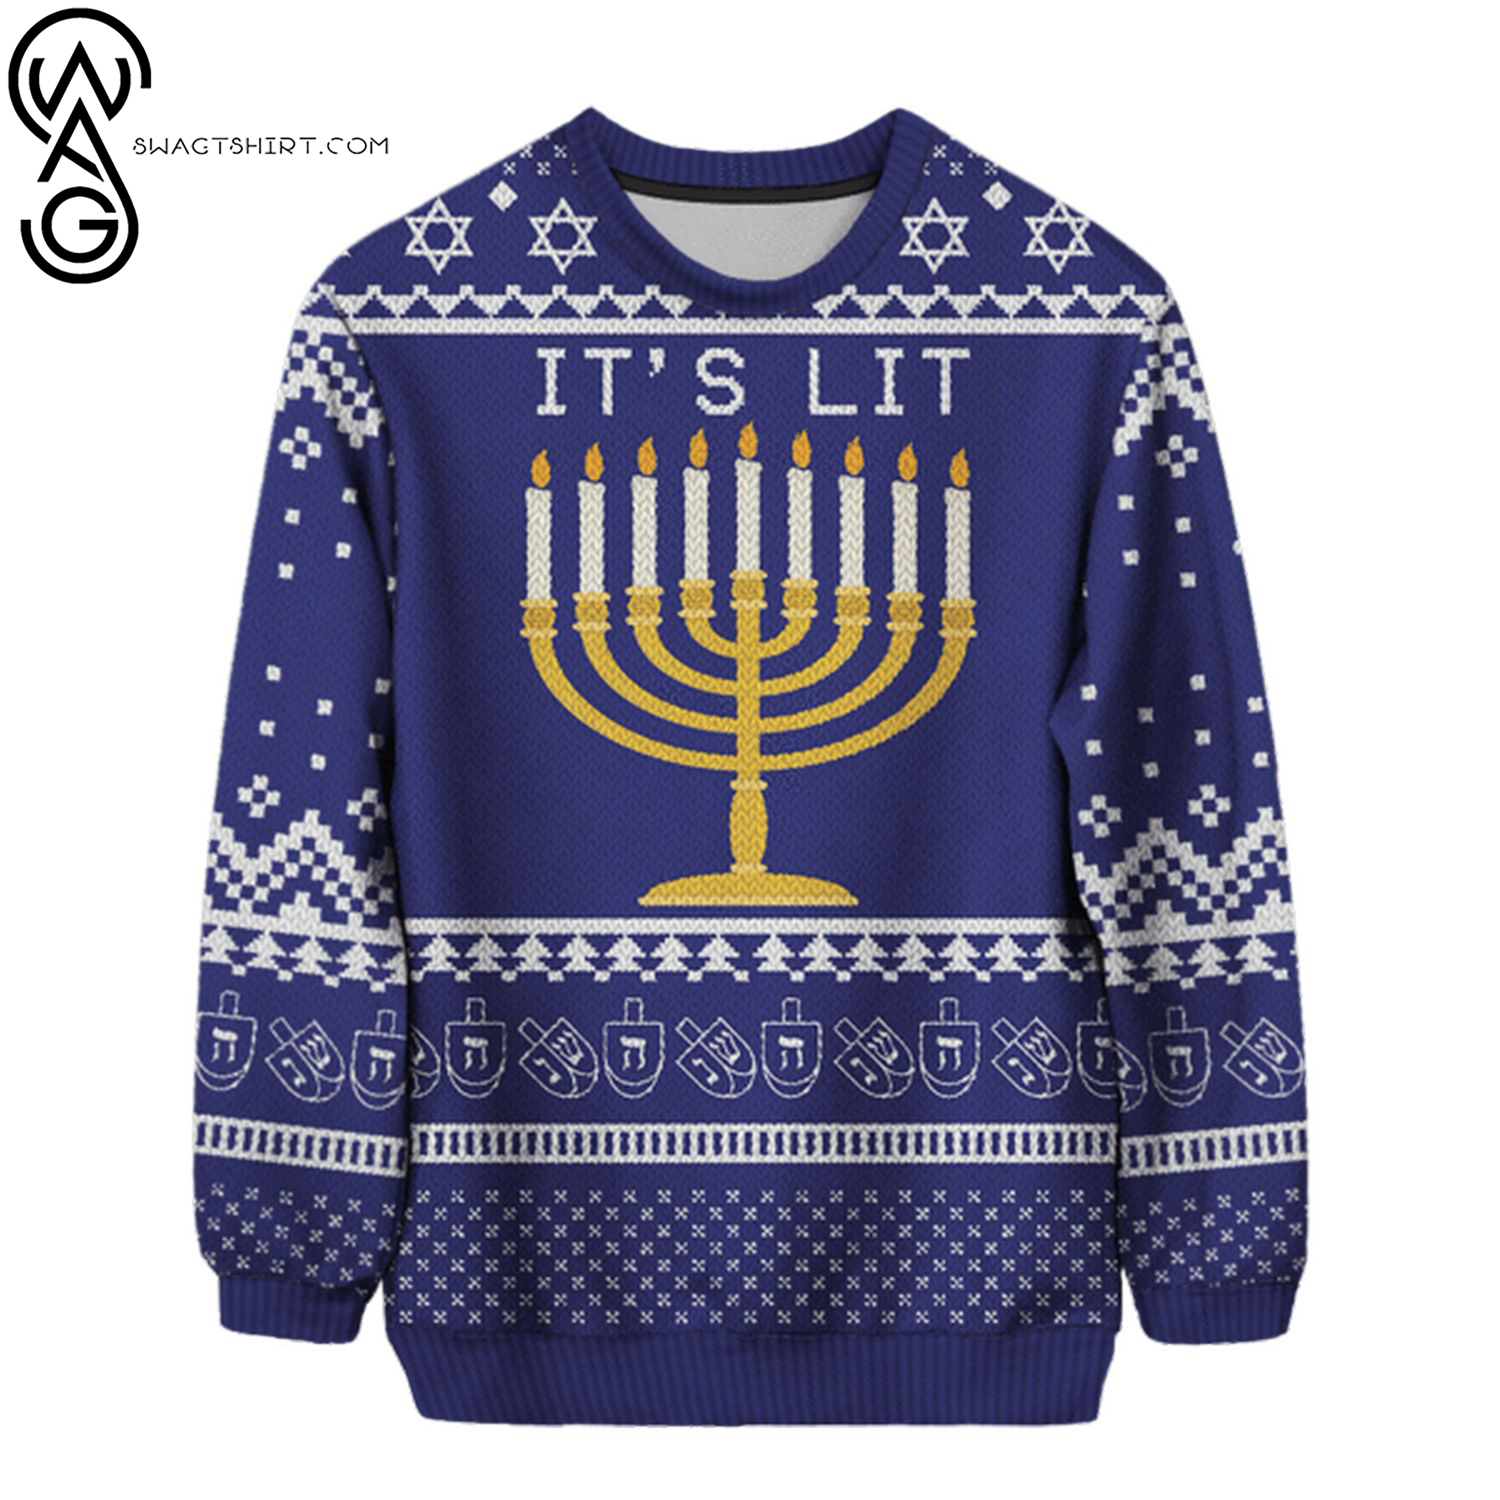 It's lit full printing ugly christmas sweater 1